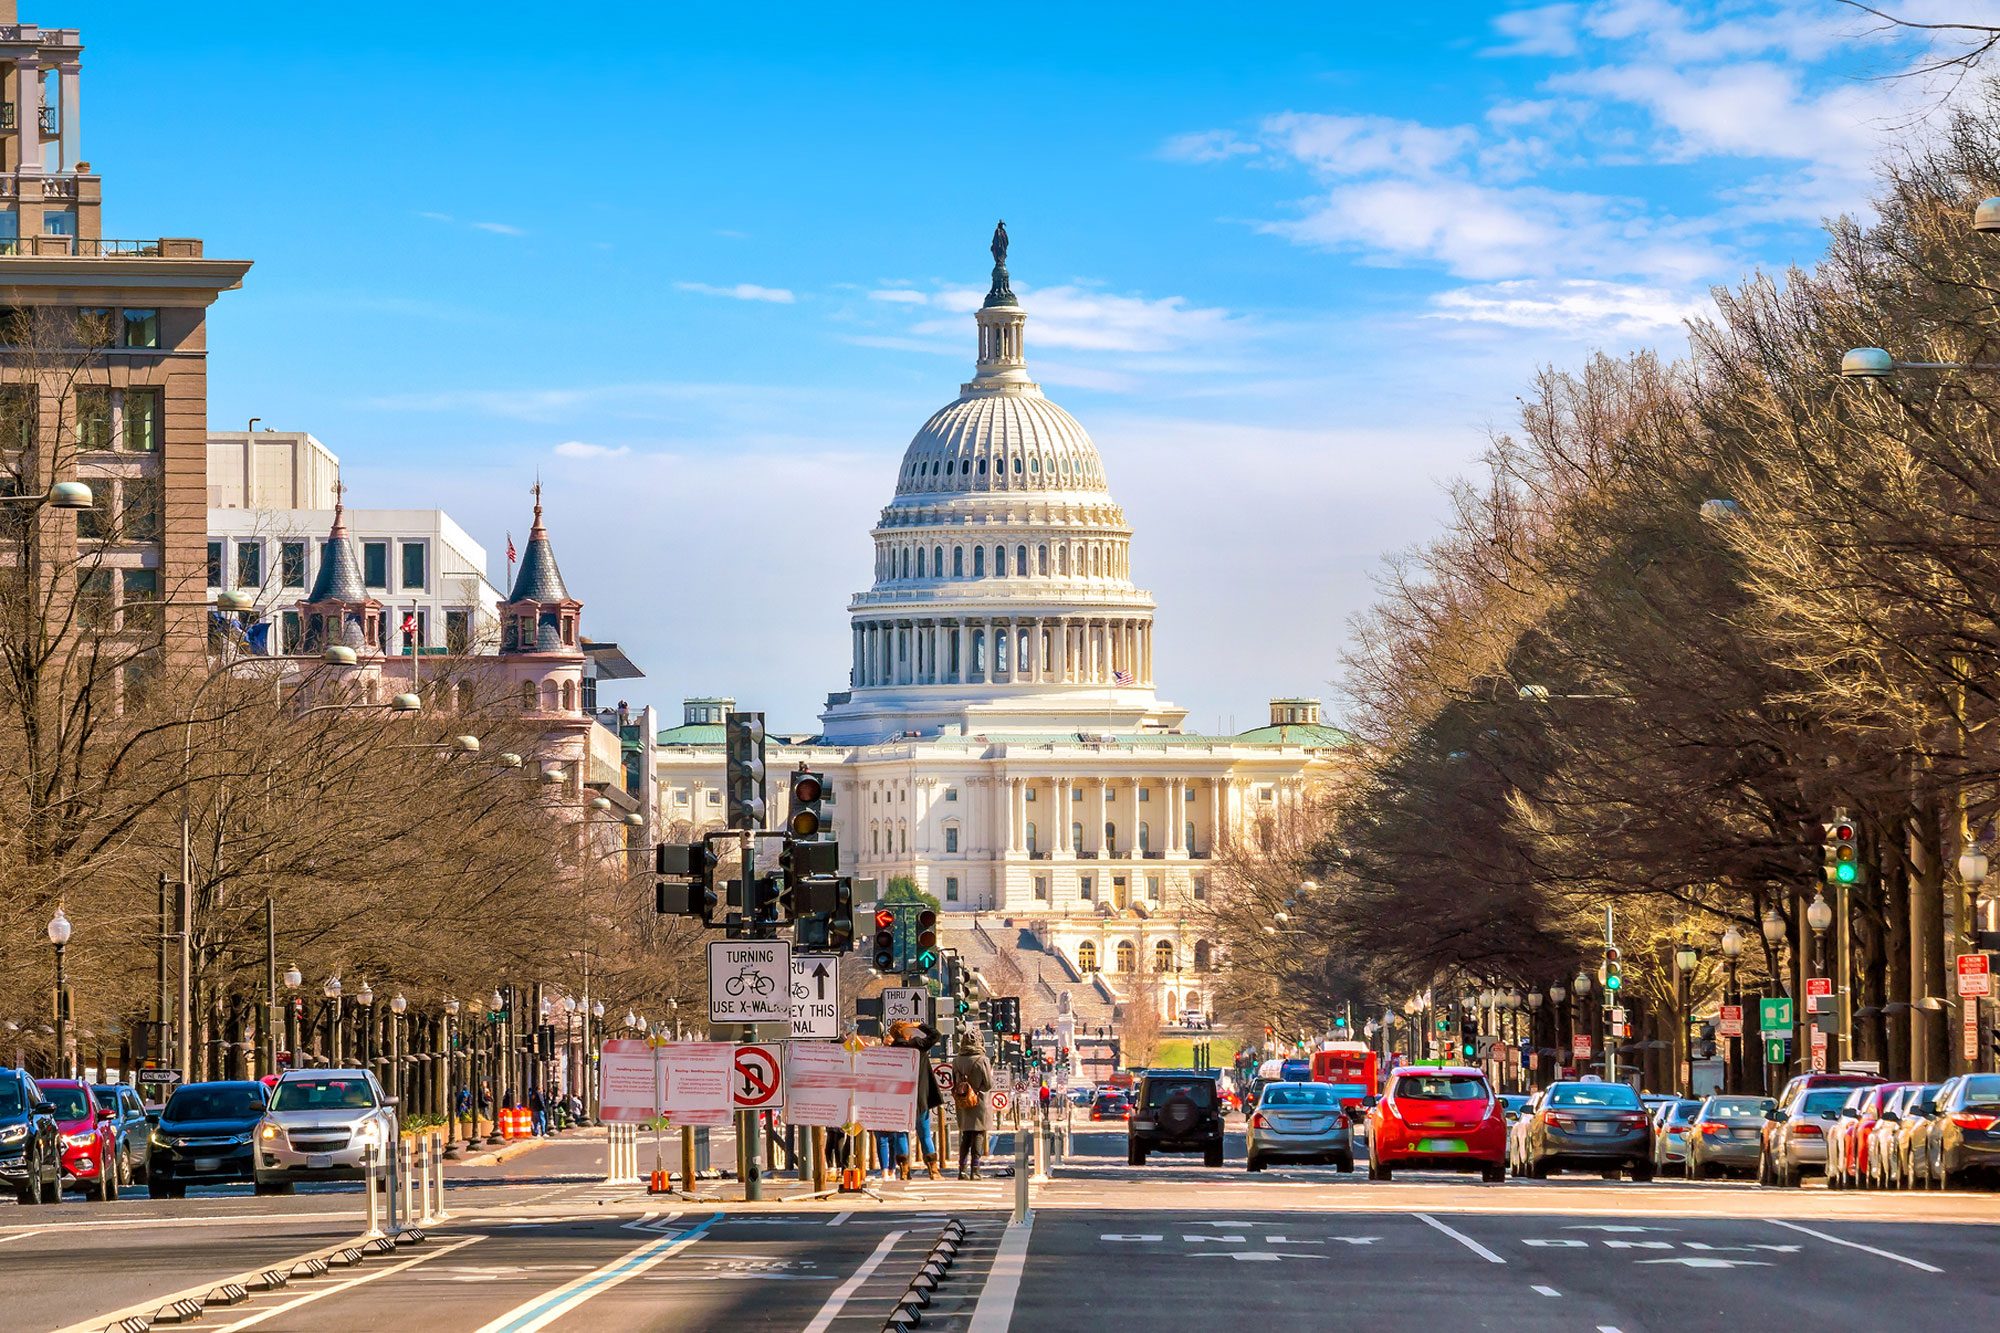 <p class=""><strong>Why you should go:</strong> To watch democracy at work during an election year ... and visit some cool museums too</p> <p>Following a record year of tourism to the nation's capital, 2024 will likely see visits continue to rise, thanks to the upcoming presidential election in November. But even if you're not a pollster, there are plenty of other attractions in the nation's capital that make it one of the best places to travel year-round. First, travelers will be happy to hear that it's easier to get into the heart of the city now that the Metro added service to Dulles International Airport with direct service on the Silver Line of the underground train system—and it's never more than $6!</p> <p>While you're in town, check out the newly renovated and reopened National Museum of Women in the Arts, which spotlights women artists from the 17th century to the present. And in 2024, the Smithsonian's contemporary art museum, the Hirshhorn, will be celebrating its 50th anniversary with a collection of new exhibits. Also, remember: Nearly all D.C. museums are free, so the sightseeing part of your trip will be <a href="https://www.rd.com/list/affordable-family-vacations/">super affordable</a>.</p> <p><strong>Where to stay:</strong> Book a room at <a href="https://www.tripadvisor.com/Hotel_Review-g28970-d84058-Reviews-The_Dupont_Circle-Washington_DC_District_of_Columbia.html" rel="noopener noreferrer">The Dupont Circle</a>, a hotel that successfully walks the line between feeling luxurious and homey. It's steps away from dozens of art galleries and museums, and it boasts an impressive art collection of its own. Don't miss brunch and dinner at the delicious new American on-site Pembroke restaurant.</p> <p class="listicle-page__cta-button-shop"><a class="shop-btn" href="https://www.tripadvisor.com/Hotel_Review-g28970-d84058-Reviews-The_Dupont_Circle-Washington_DC_District_of_Columbia.html">Book Now</a></p>